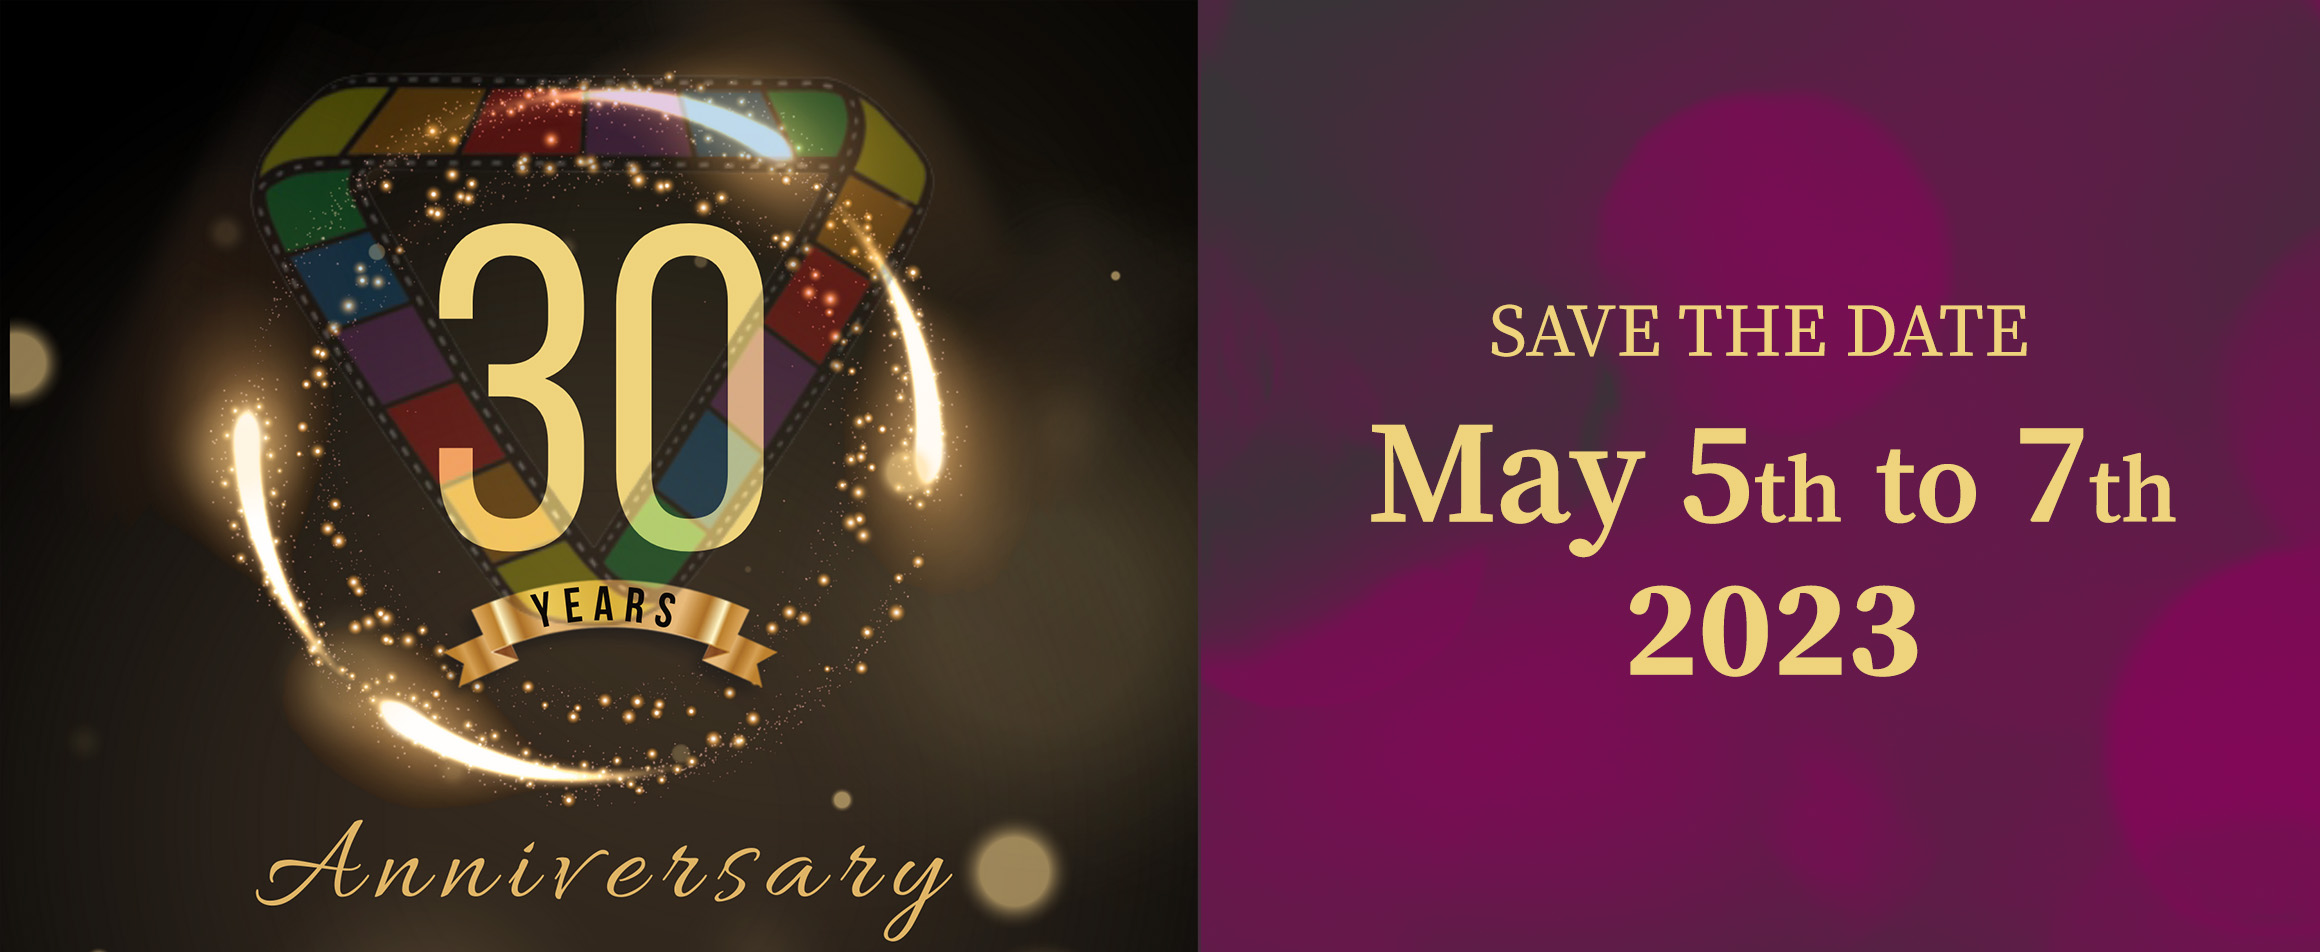 LLFF 30th Anniversary Save the Date May 5th to 7th, 2023